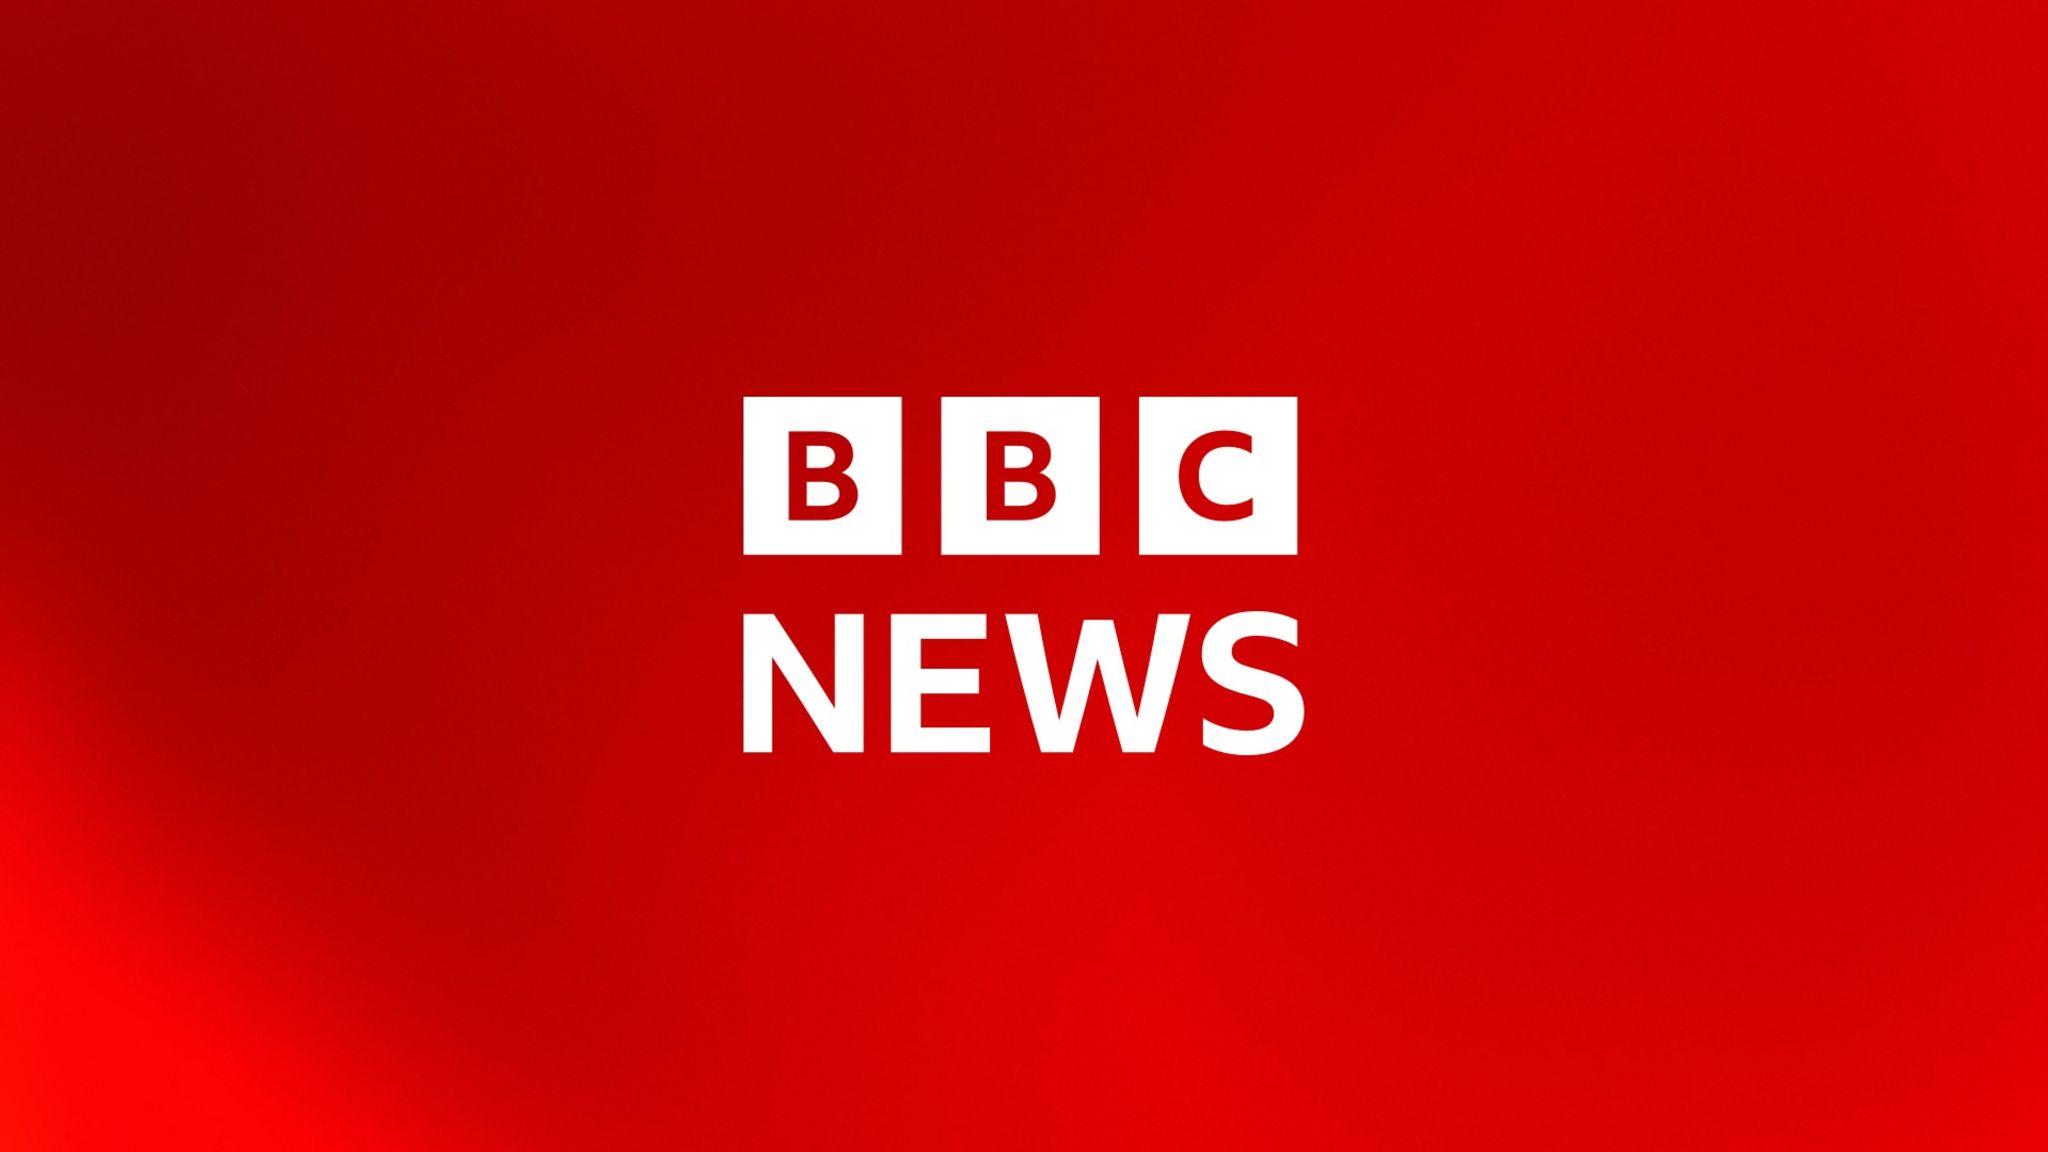 Merger between BBC's News Channel and World News ruled out - BBC News